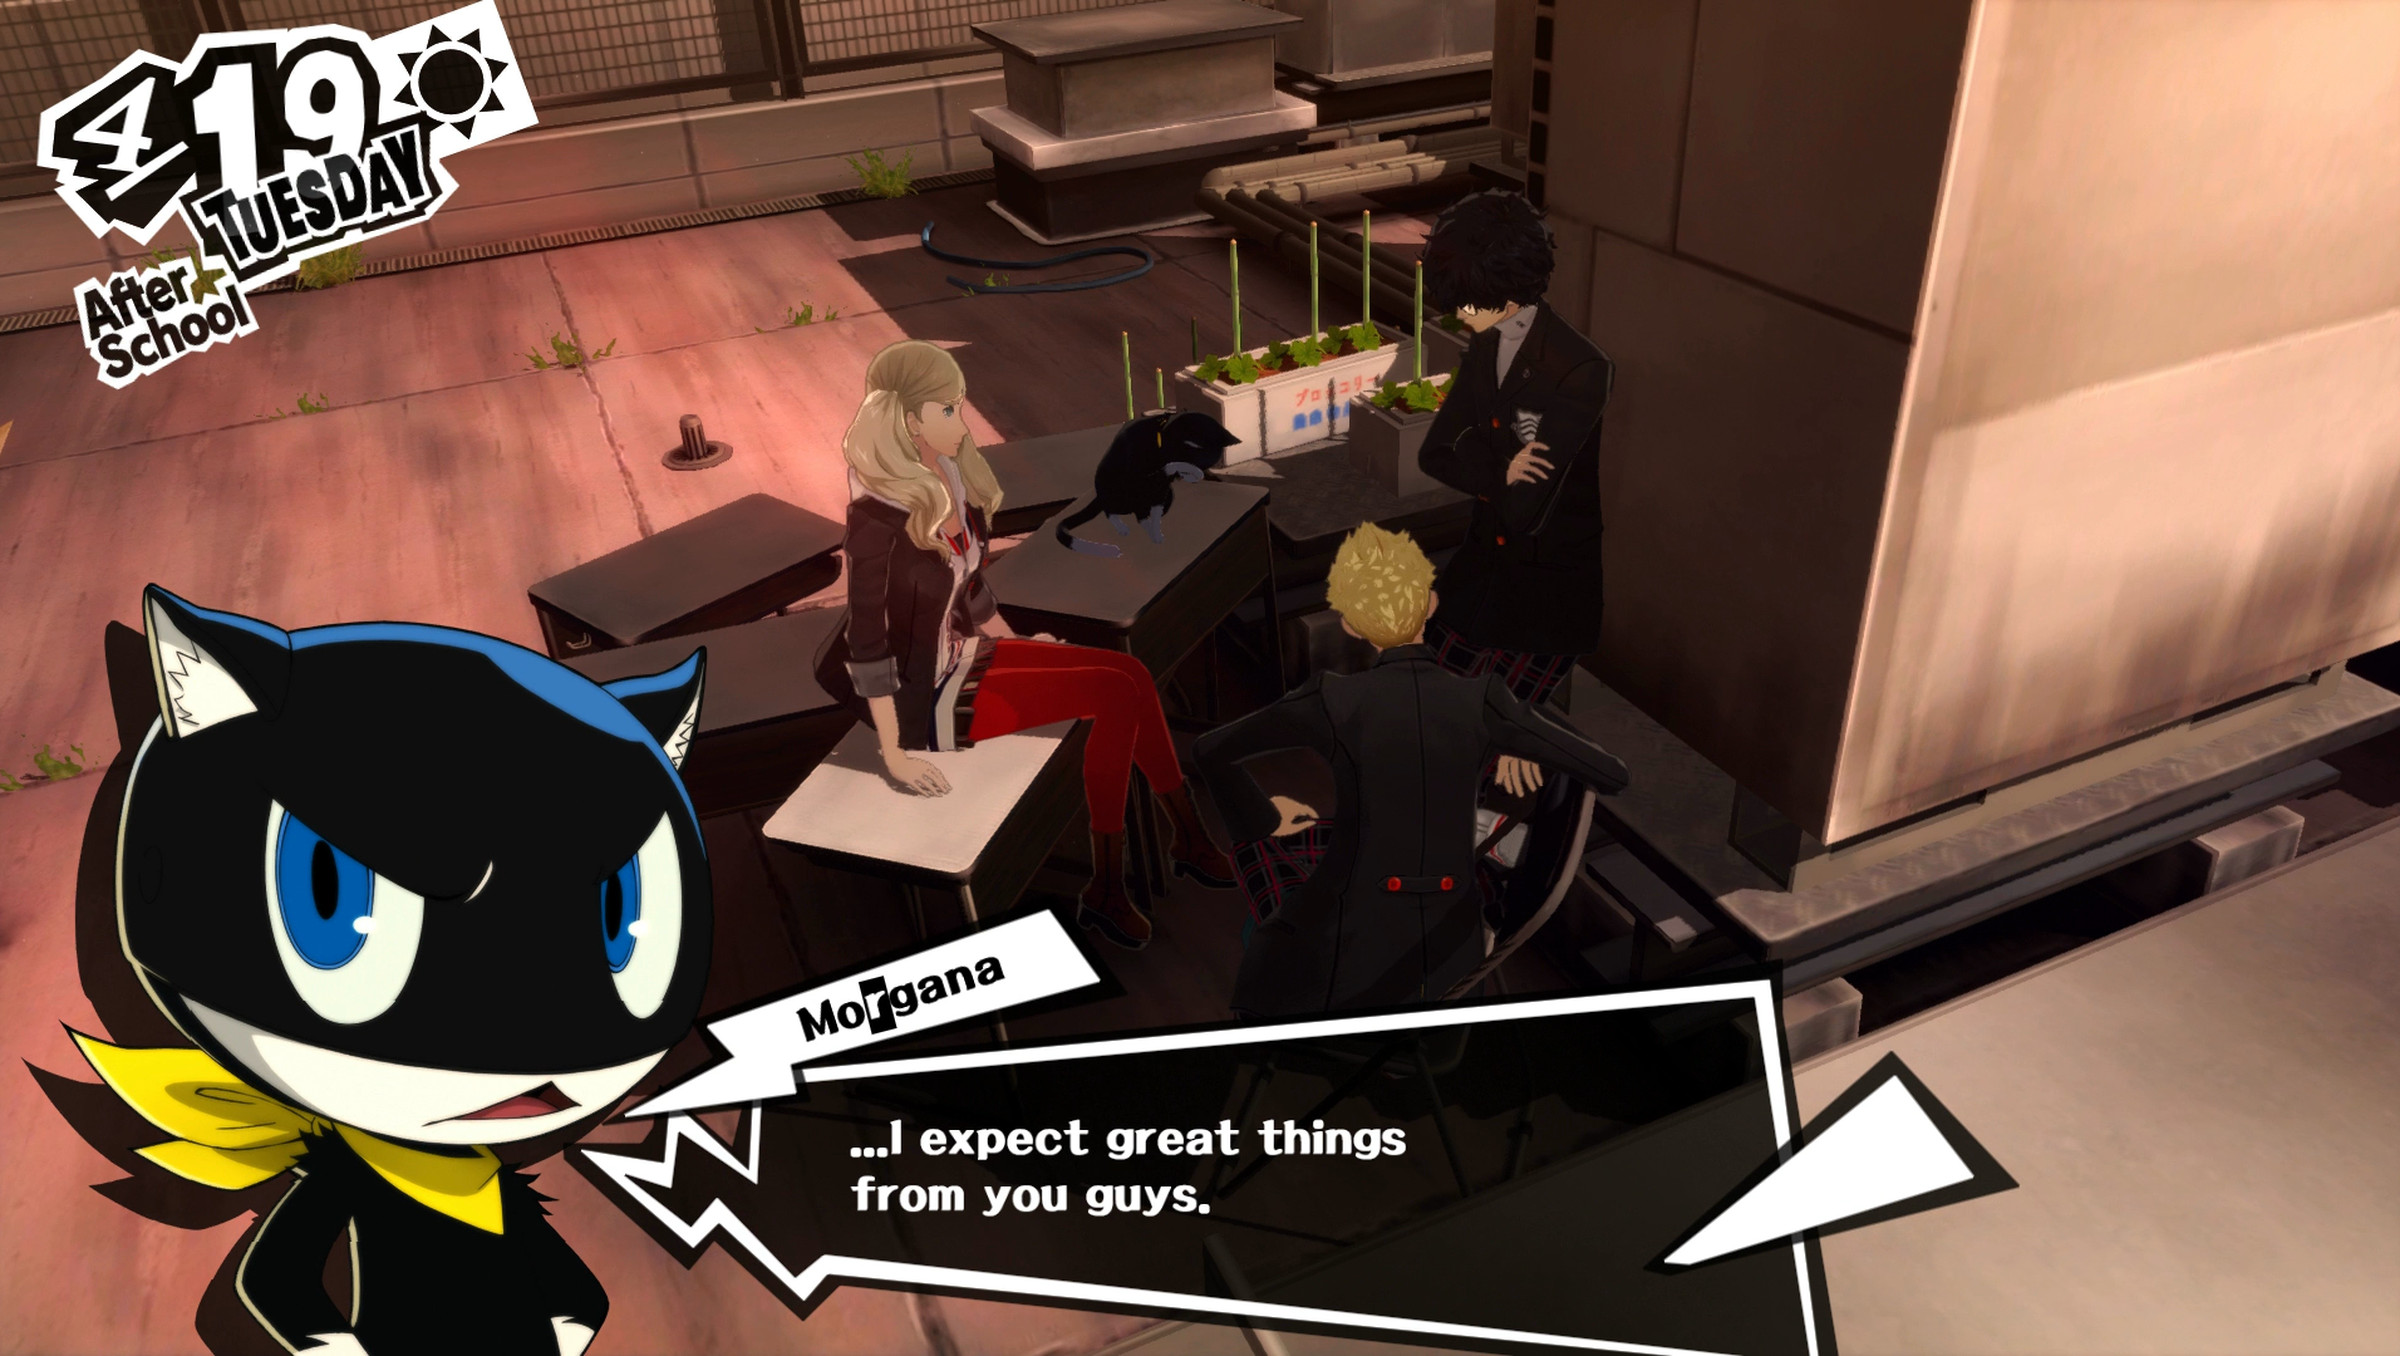 Persona 5 review: a cult classic shined to perfection - The Verge